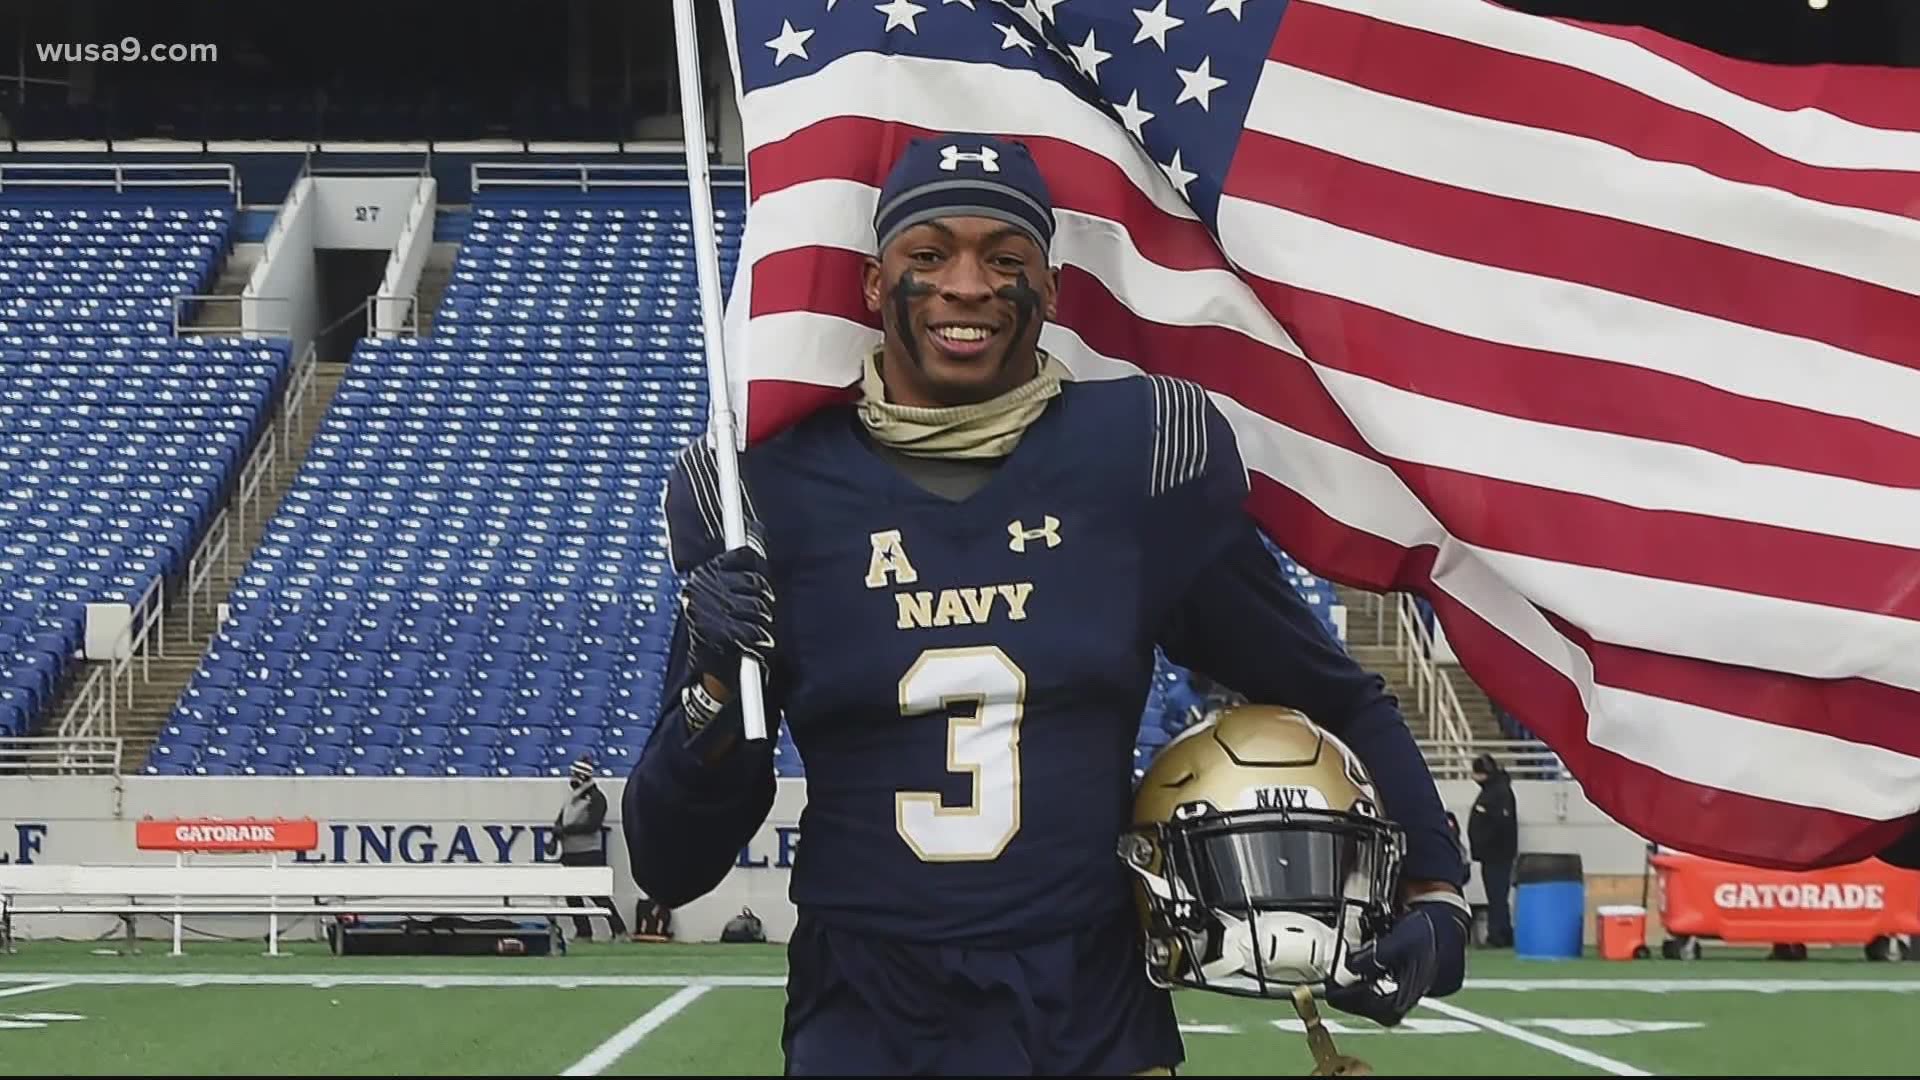 The US Navy has denied a request by football team captain Cameron Kinley to delay his military service and try to play in the National Football League.